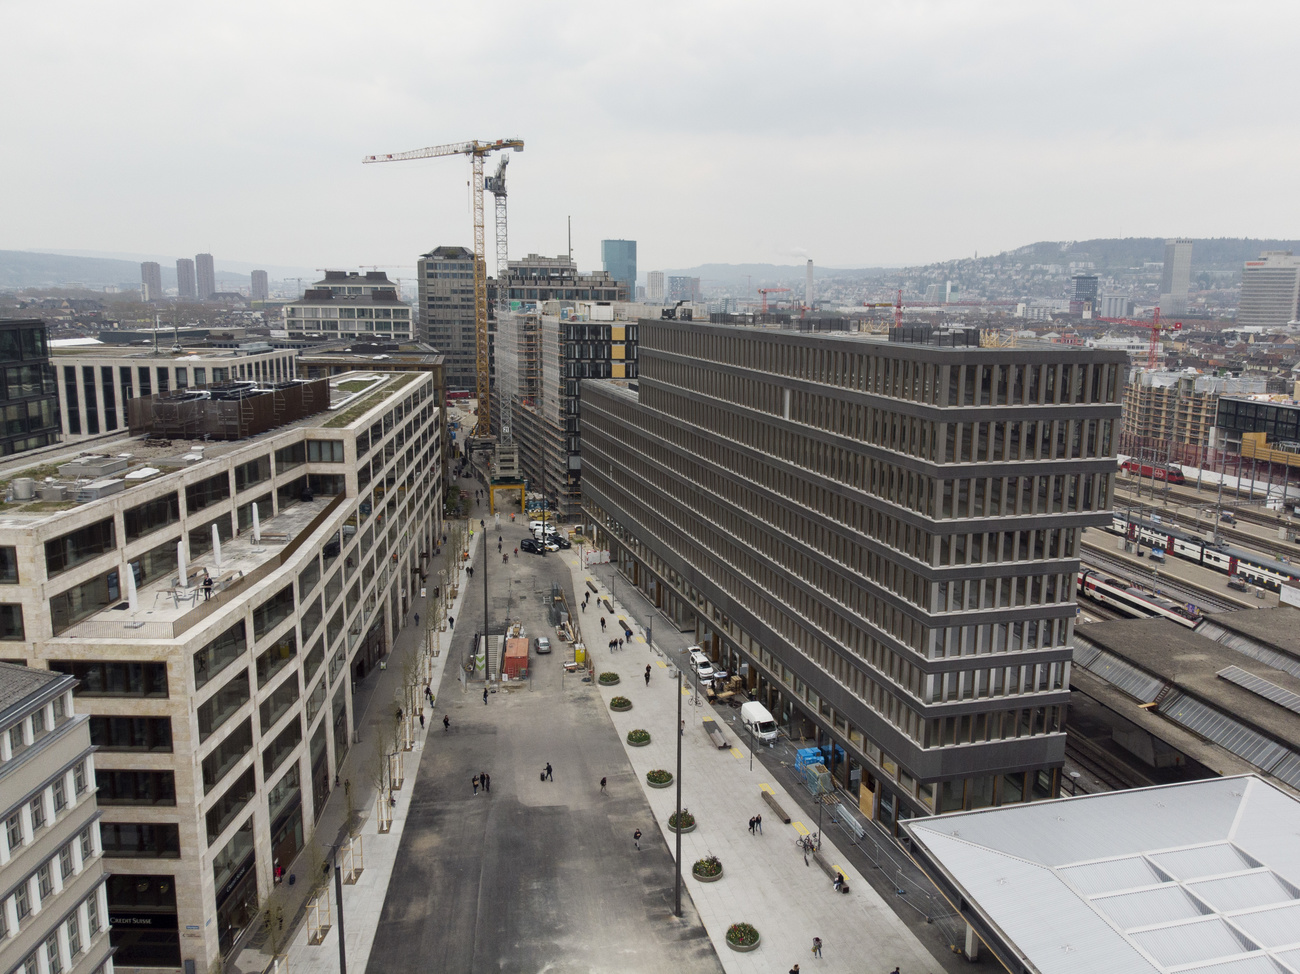 View of the Europaalle urban development in Zurich on April 12, 2019. 